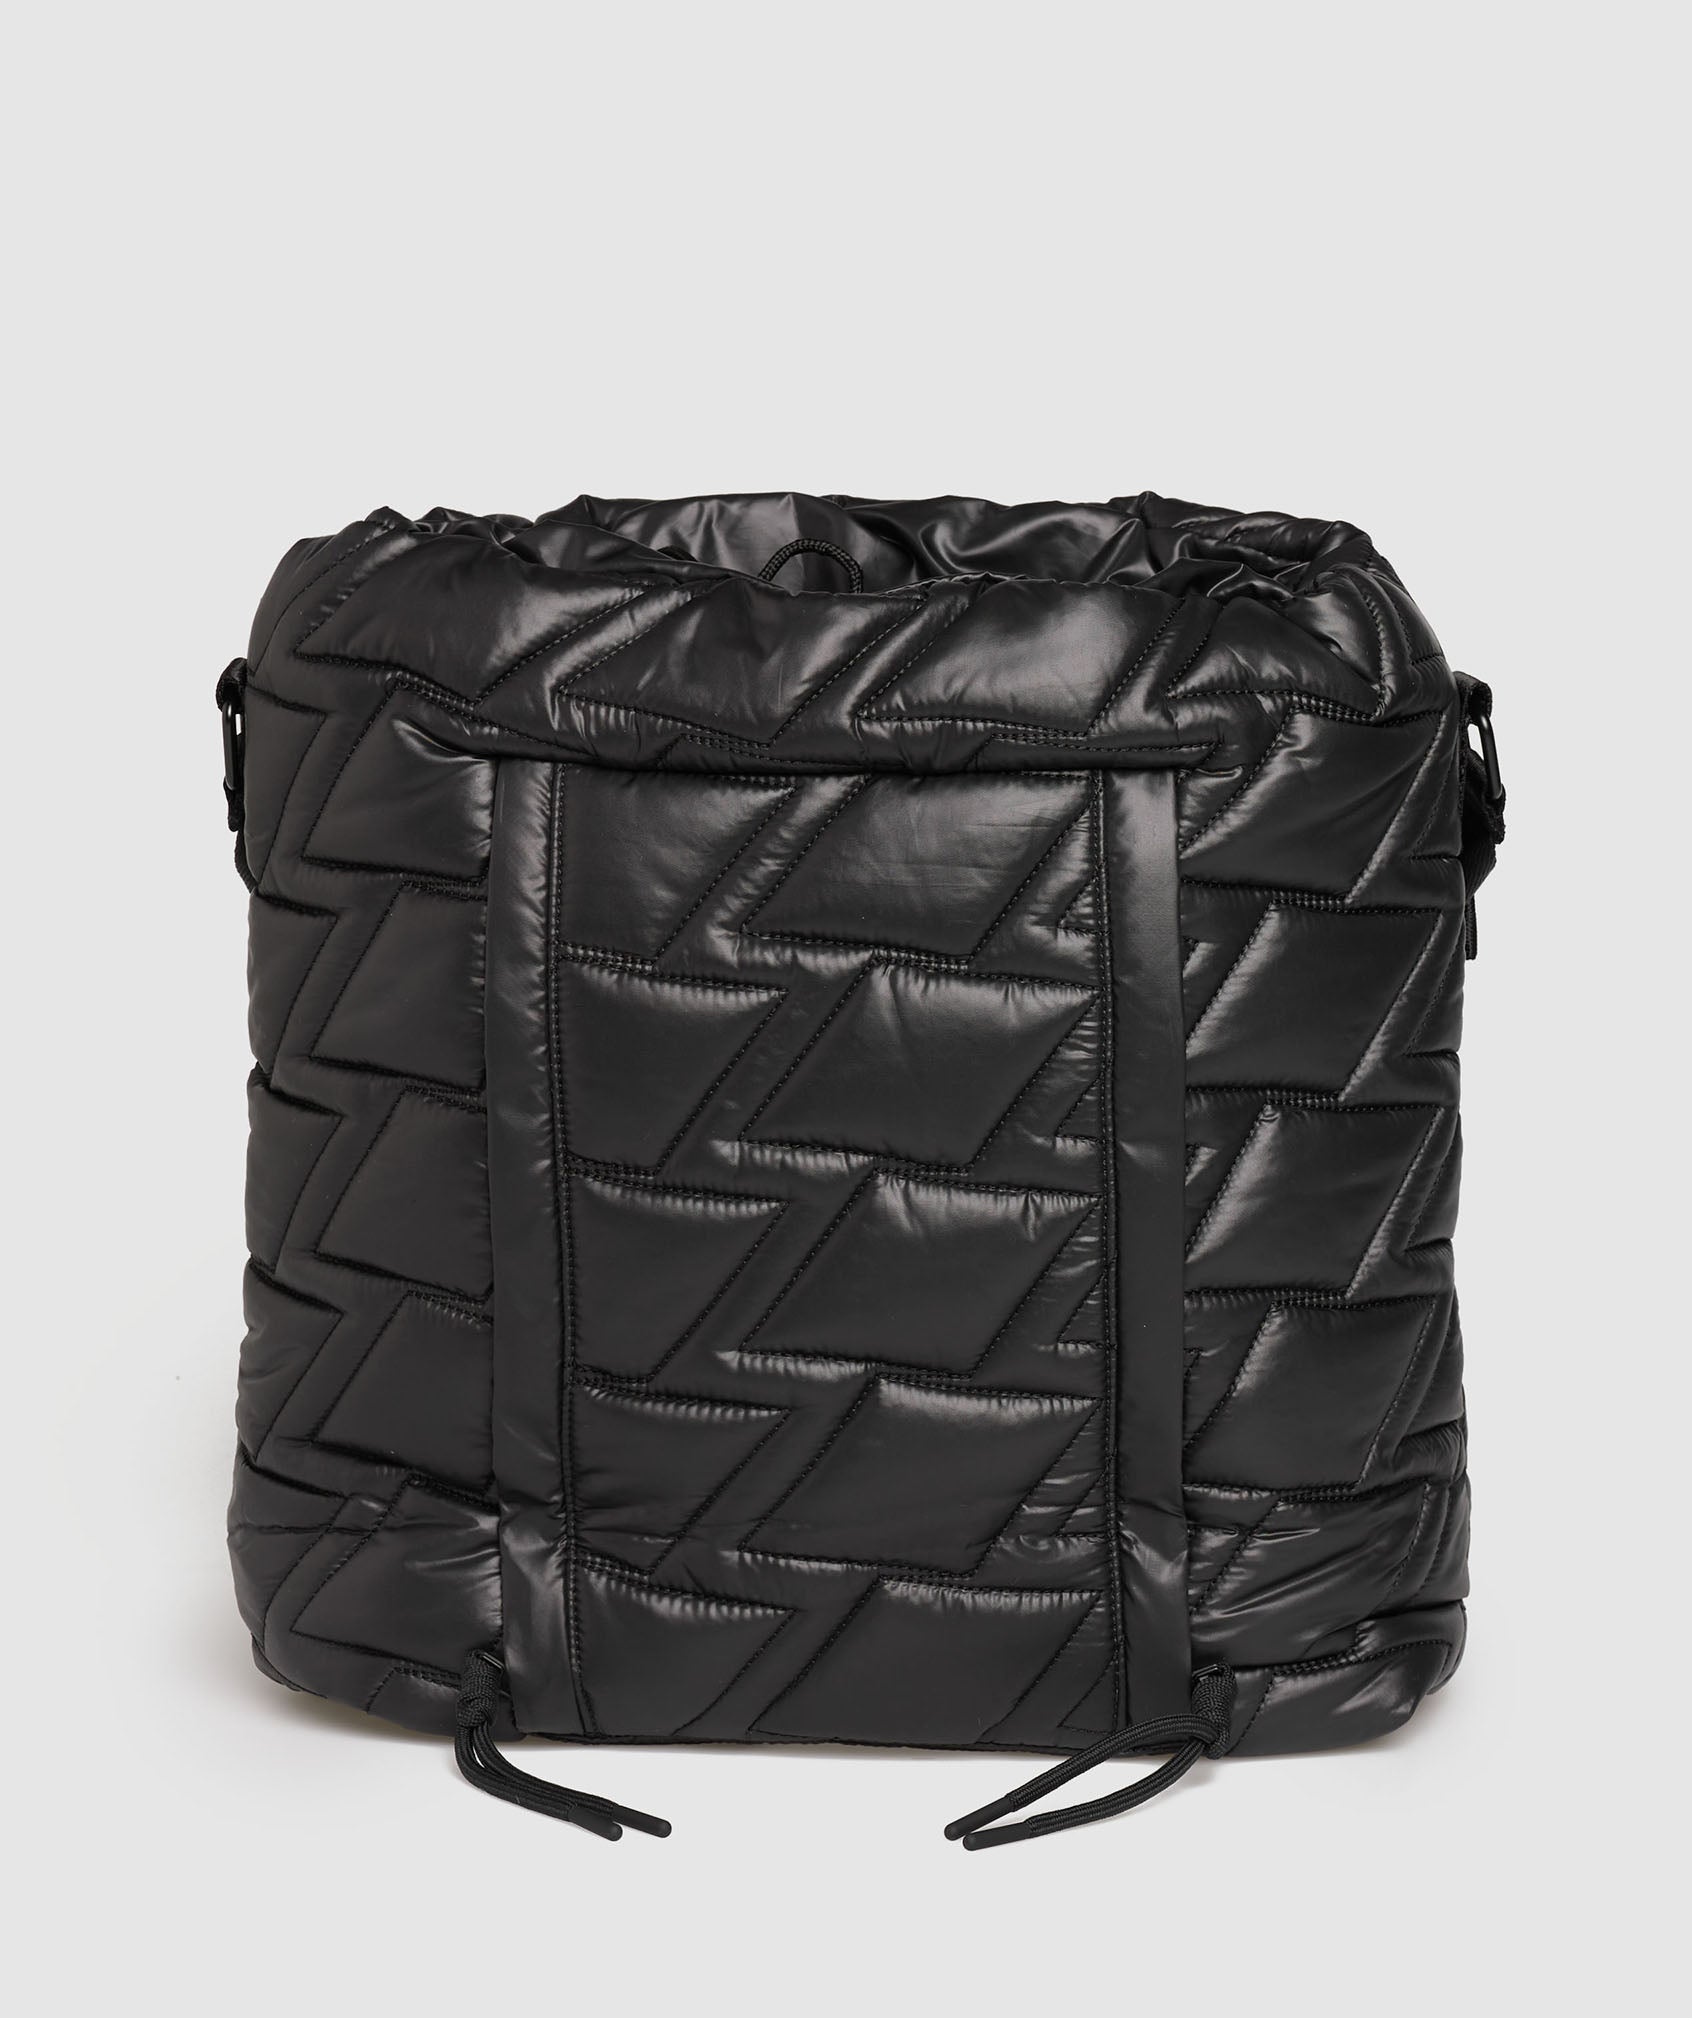 Quilted Yoga Tote in Black - view 3